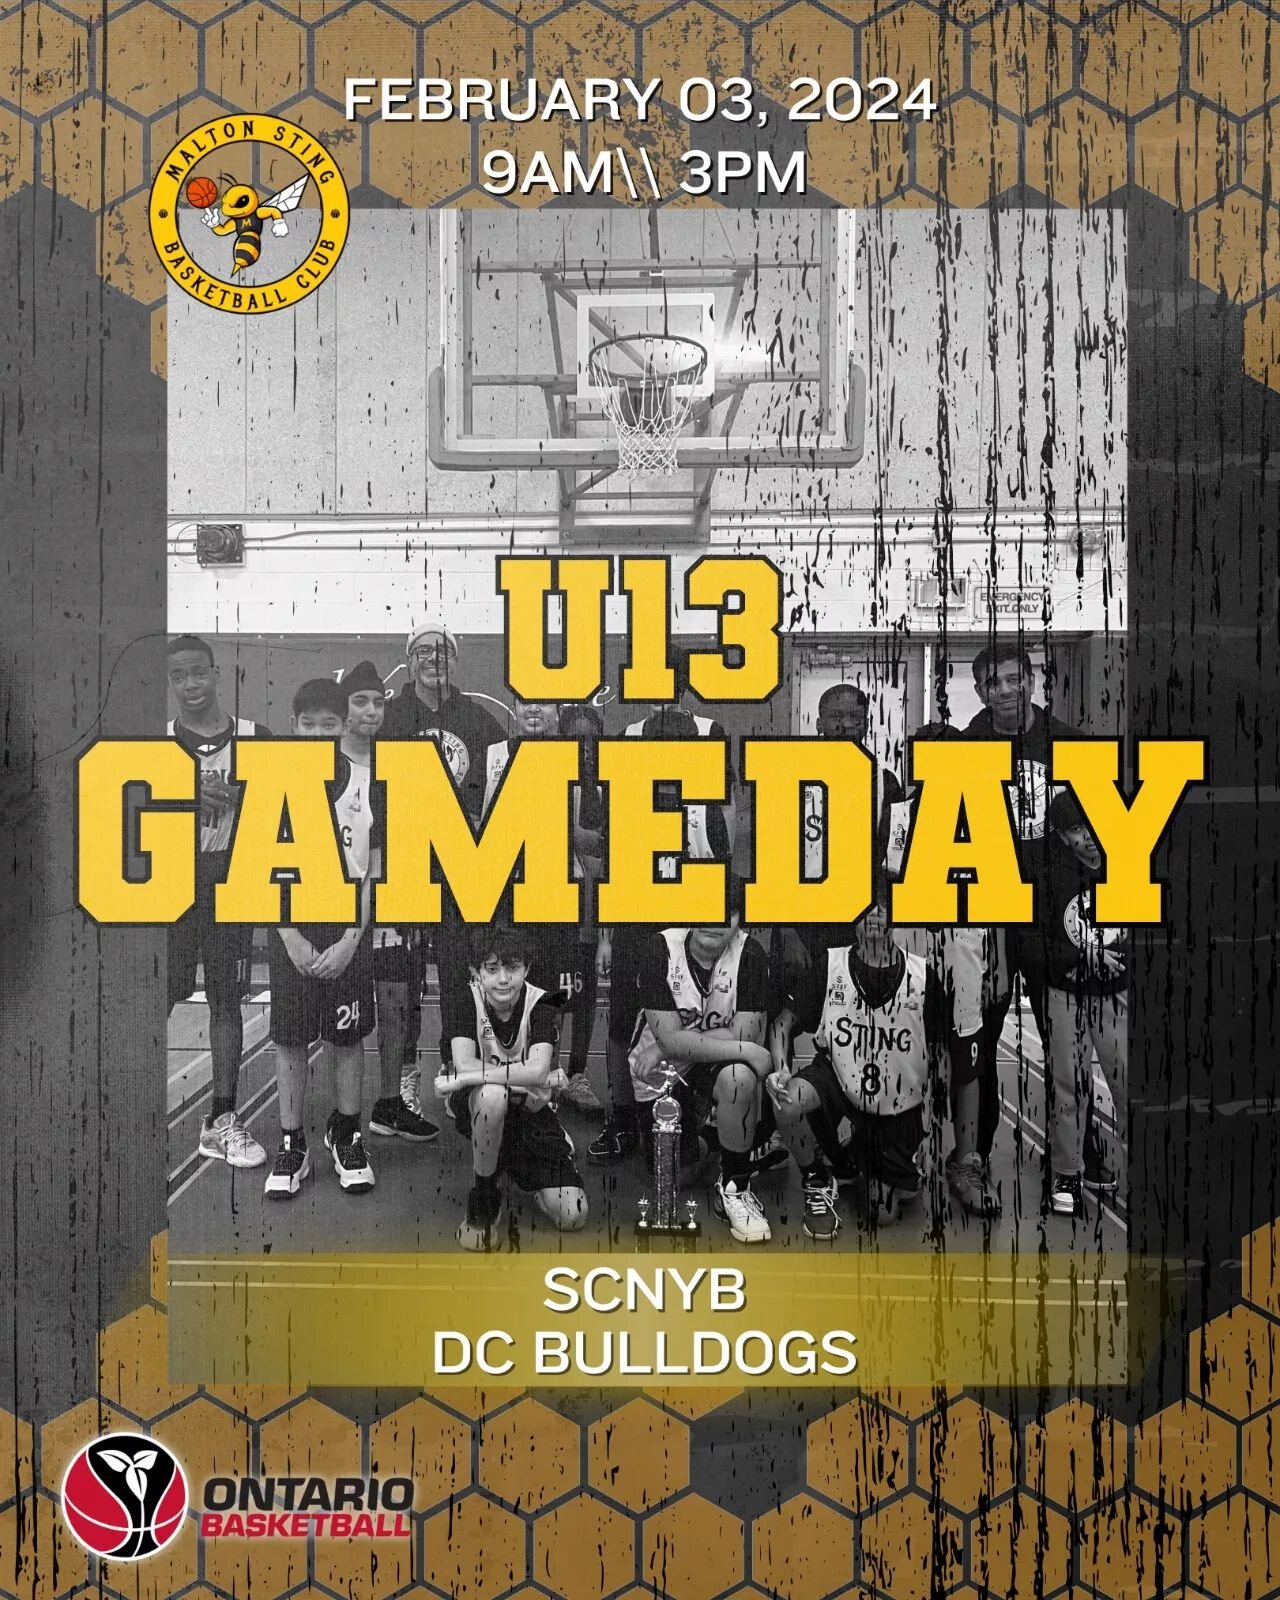 Gameday for our U13s 🚀🐝